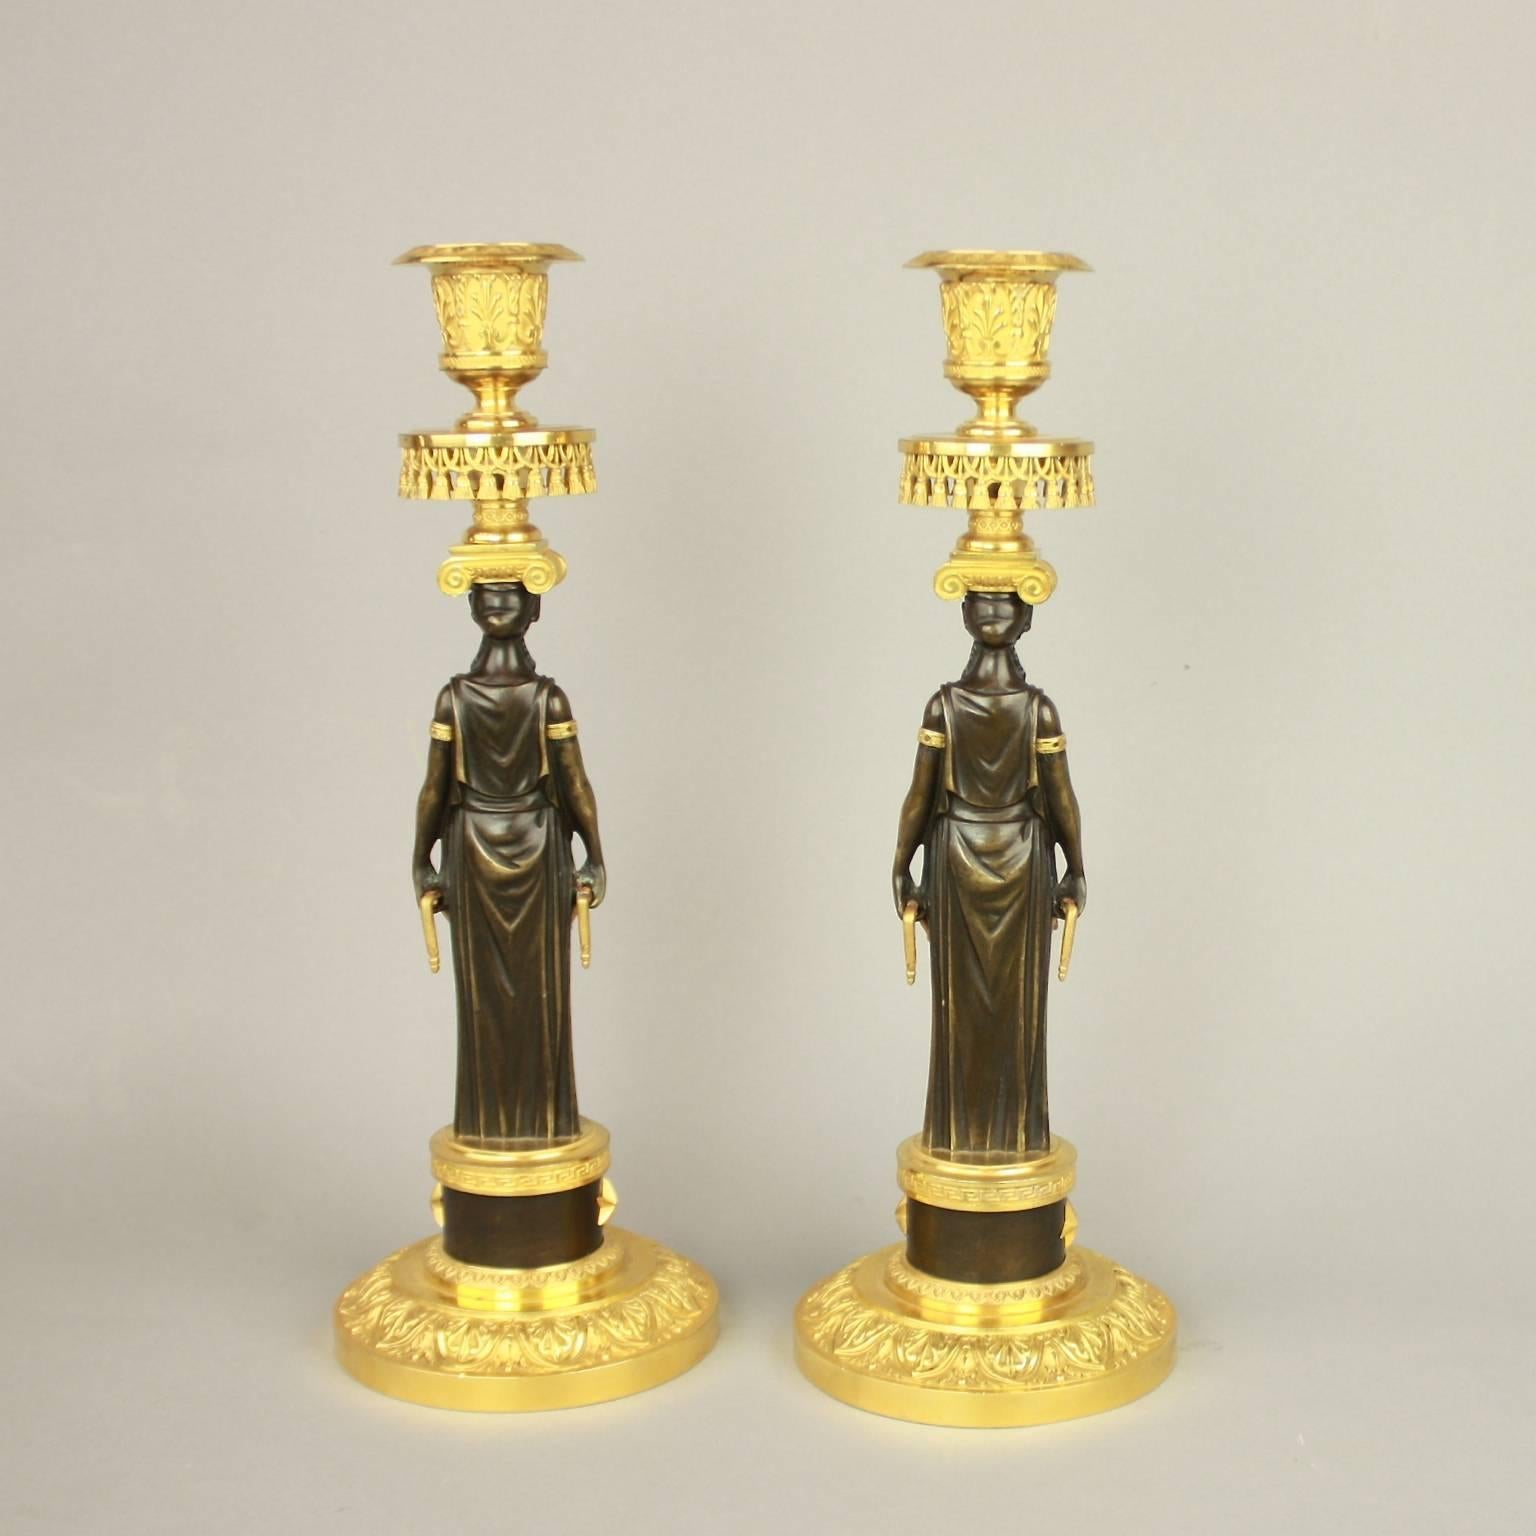 Early 19th Century Pair of Empire Ormolu and Patinated Bronze Candlestick in the Manner of C.Galle